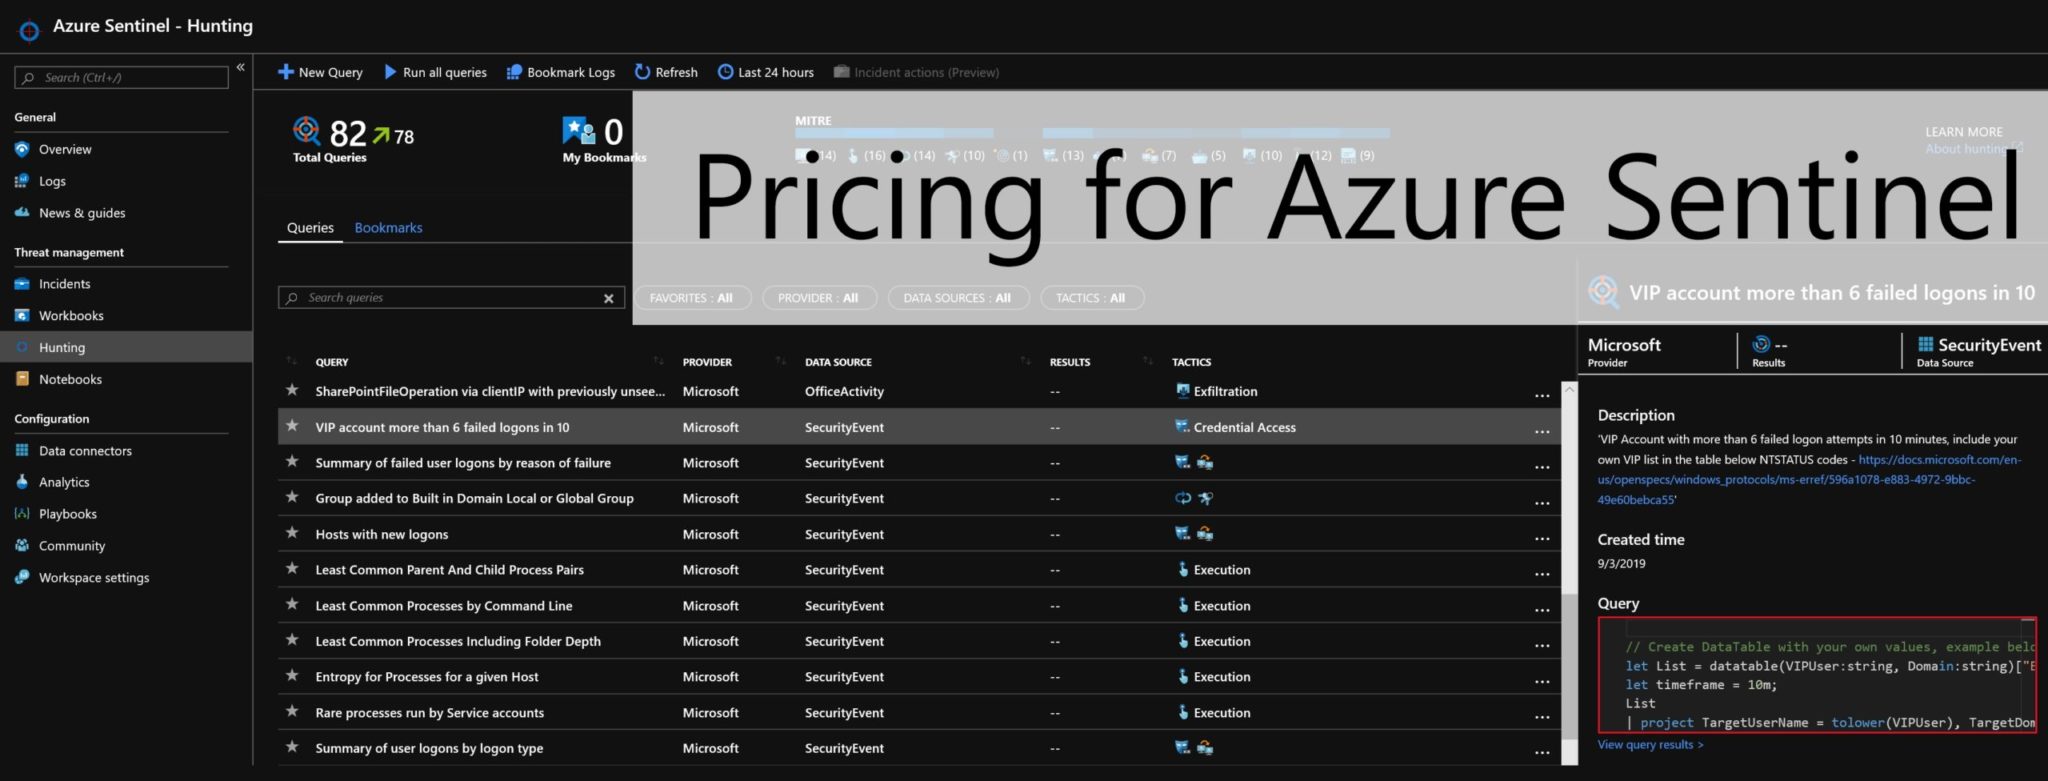 Pricing for Azure Sentinel is GA 3